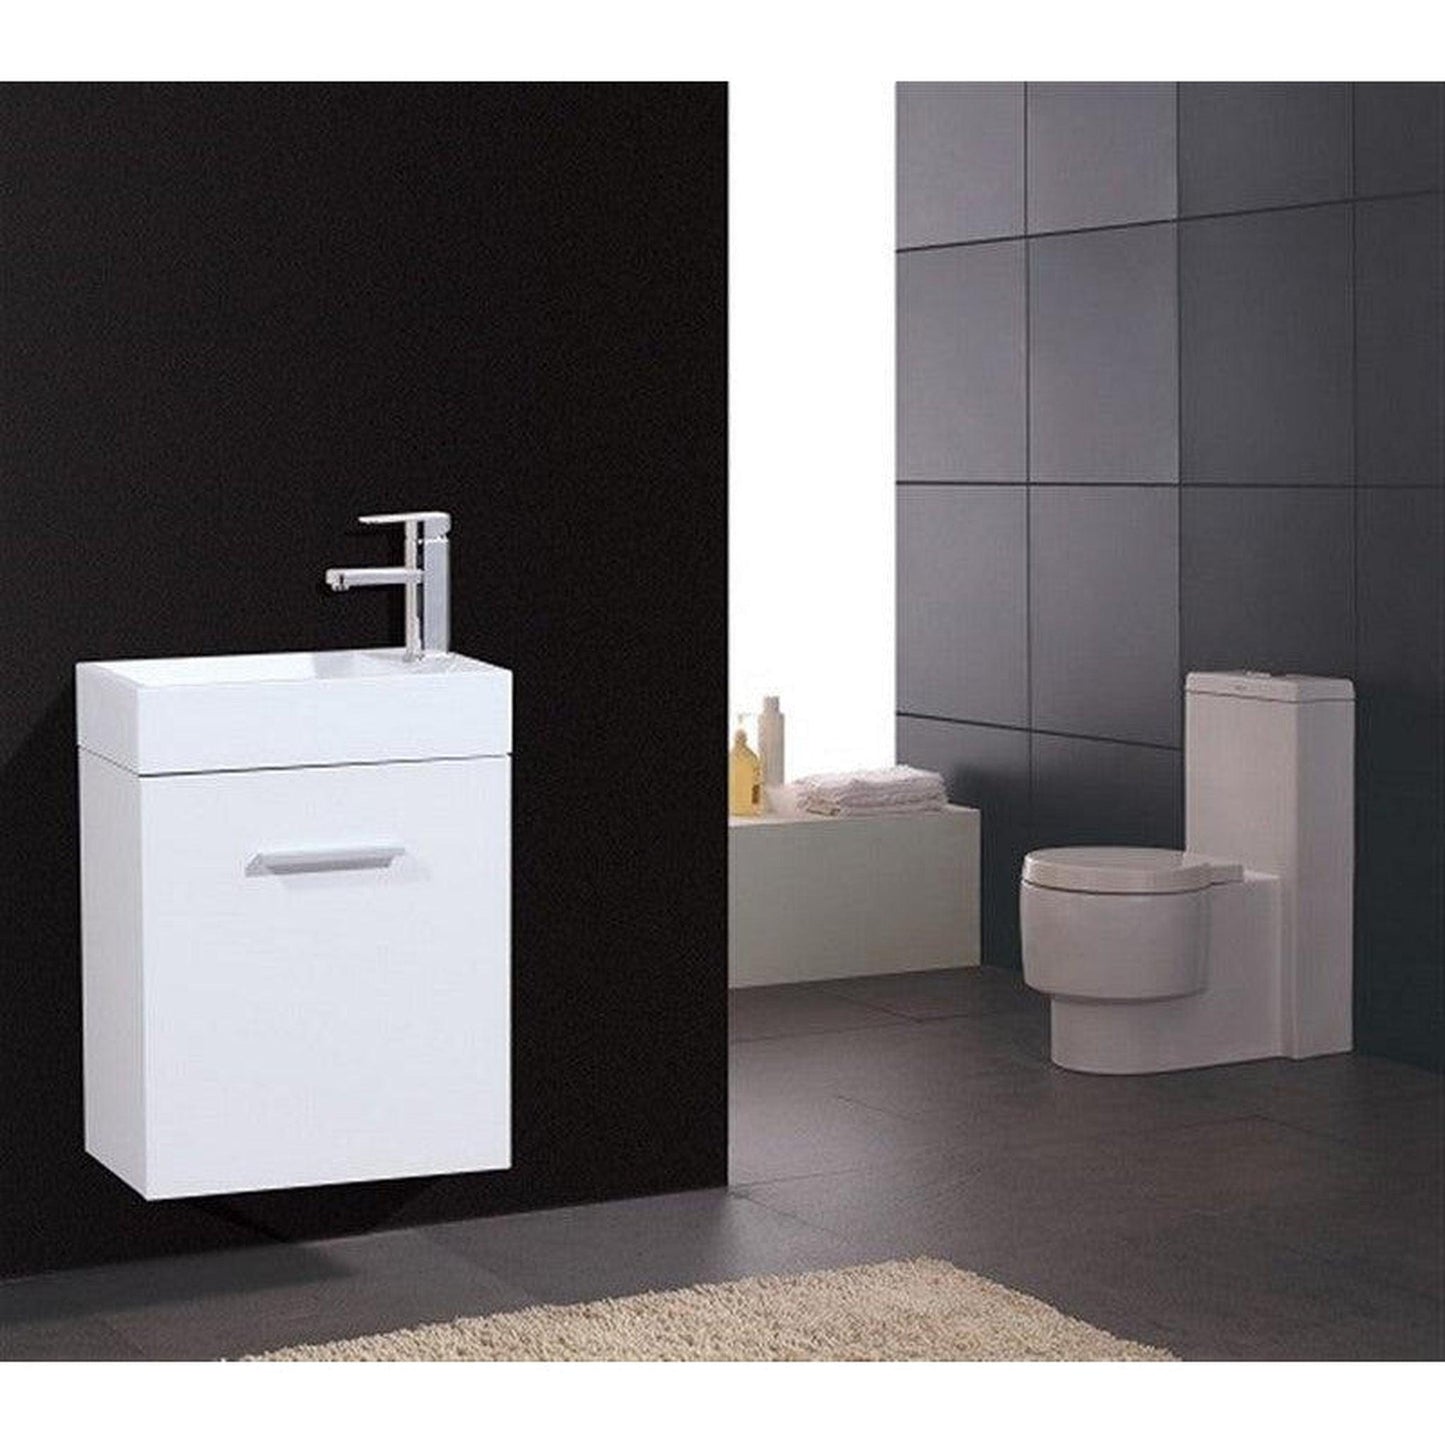 KubeBath Bliss 18" High Gloss White Wall-Mounted Modern Bathroom Vanity With Single Integrated Acrylic Sink With Overflow